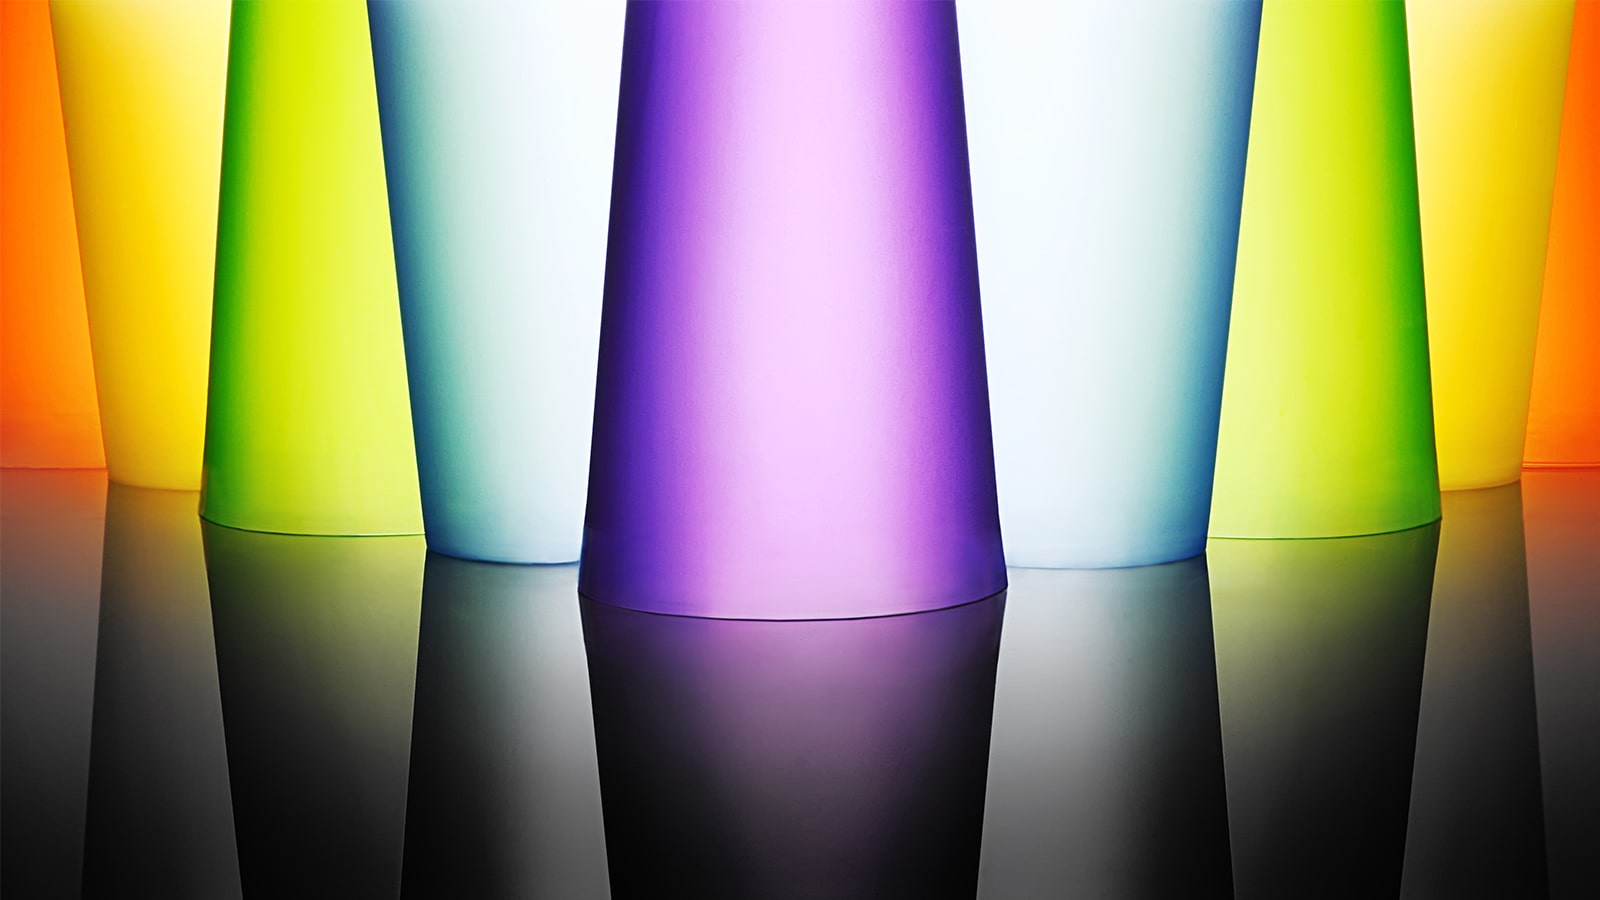 gjt An image that bright and colorful glass cups.